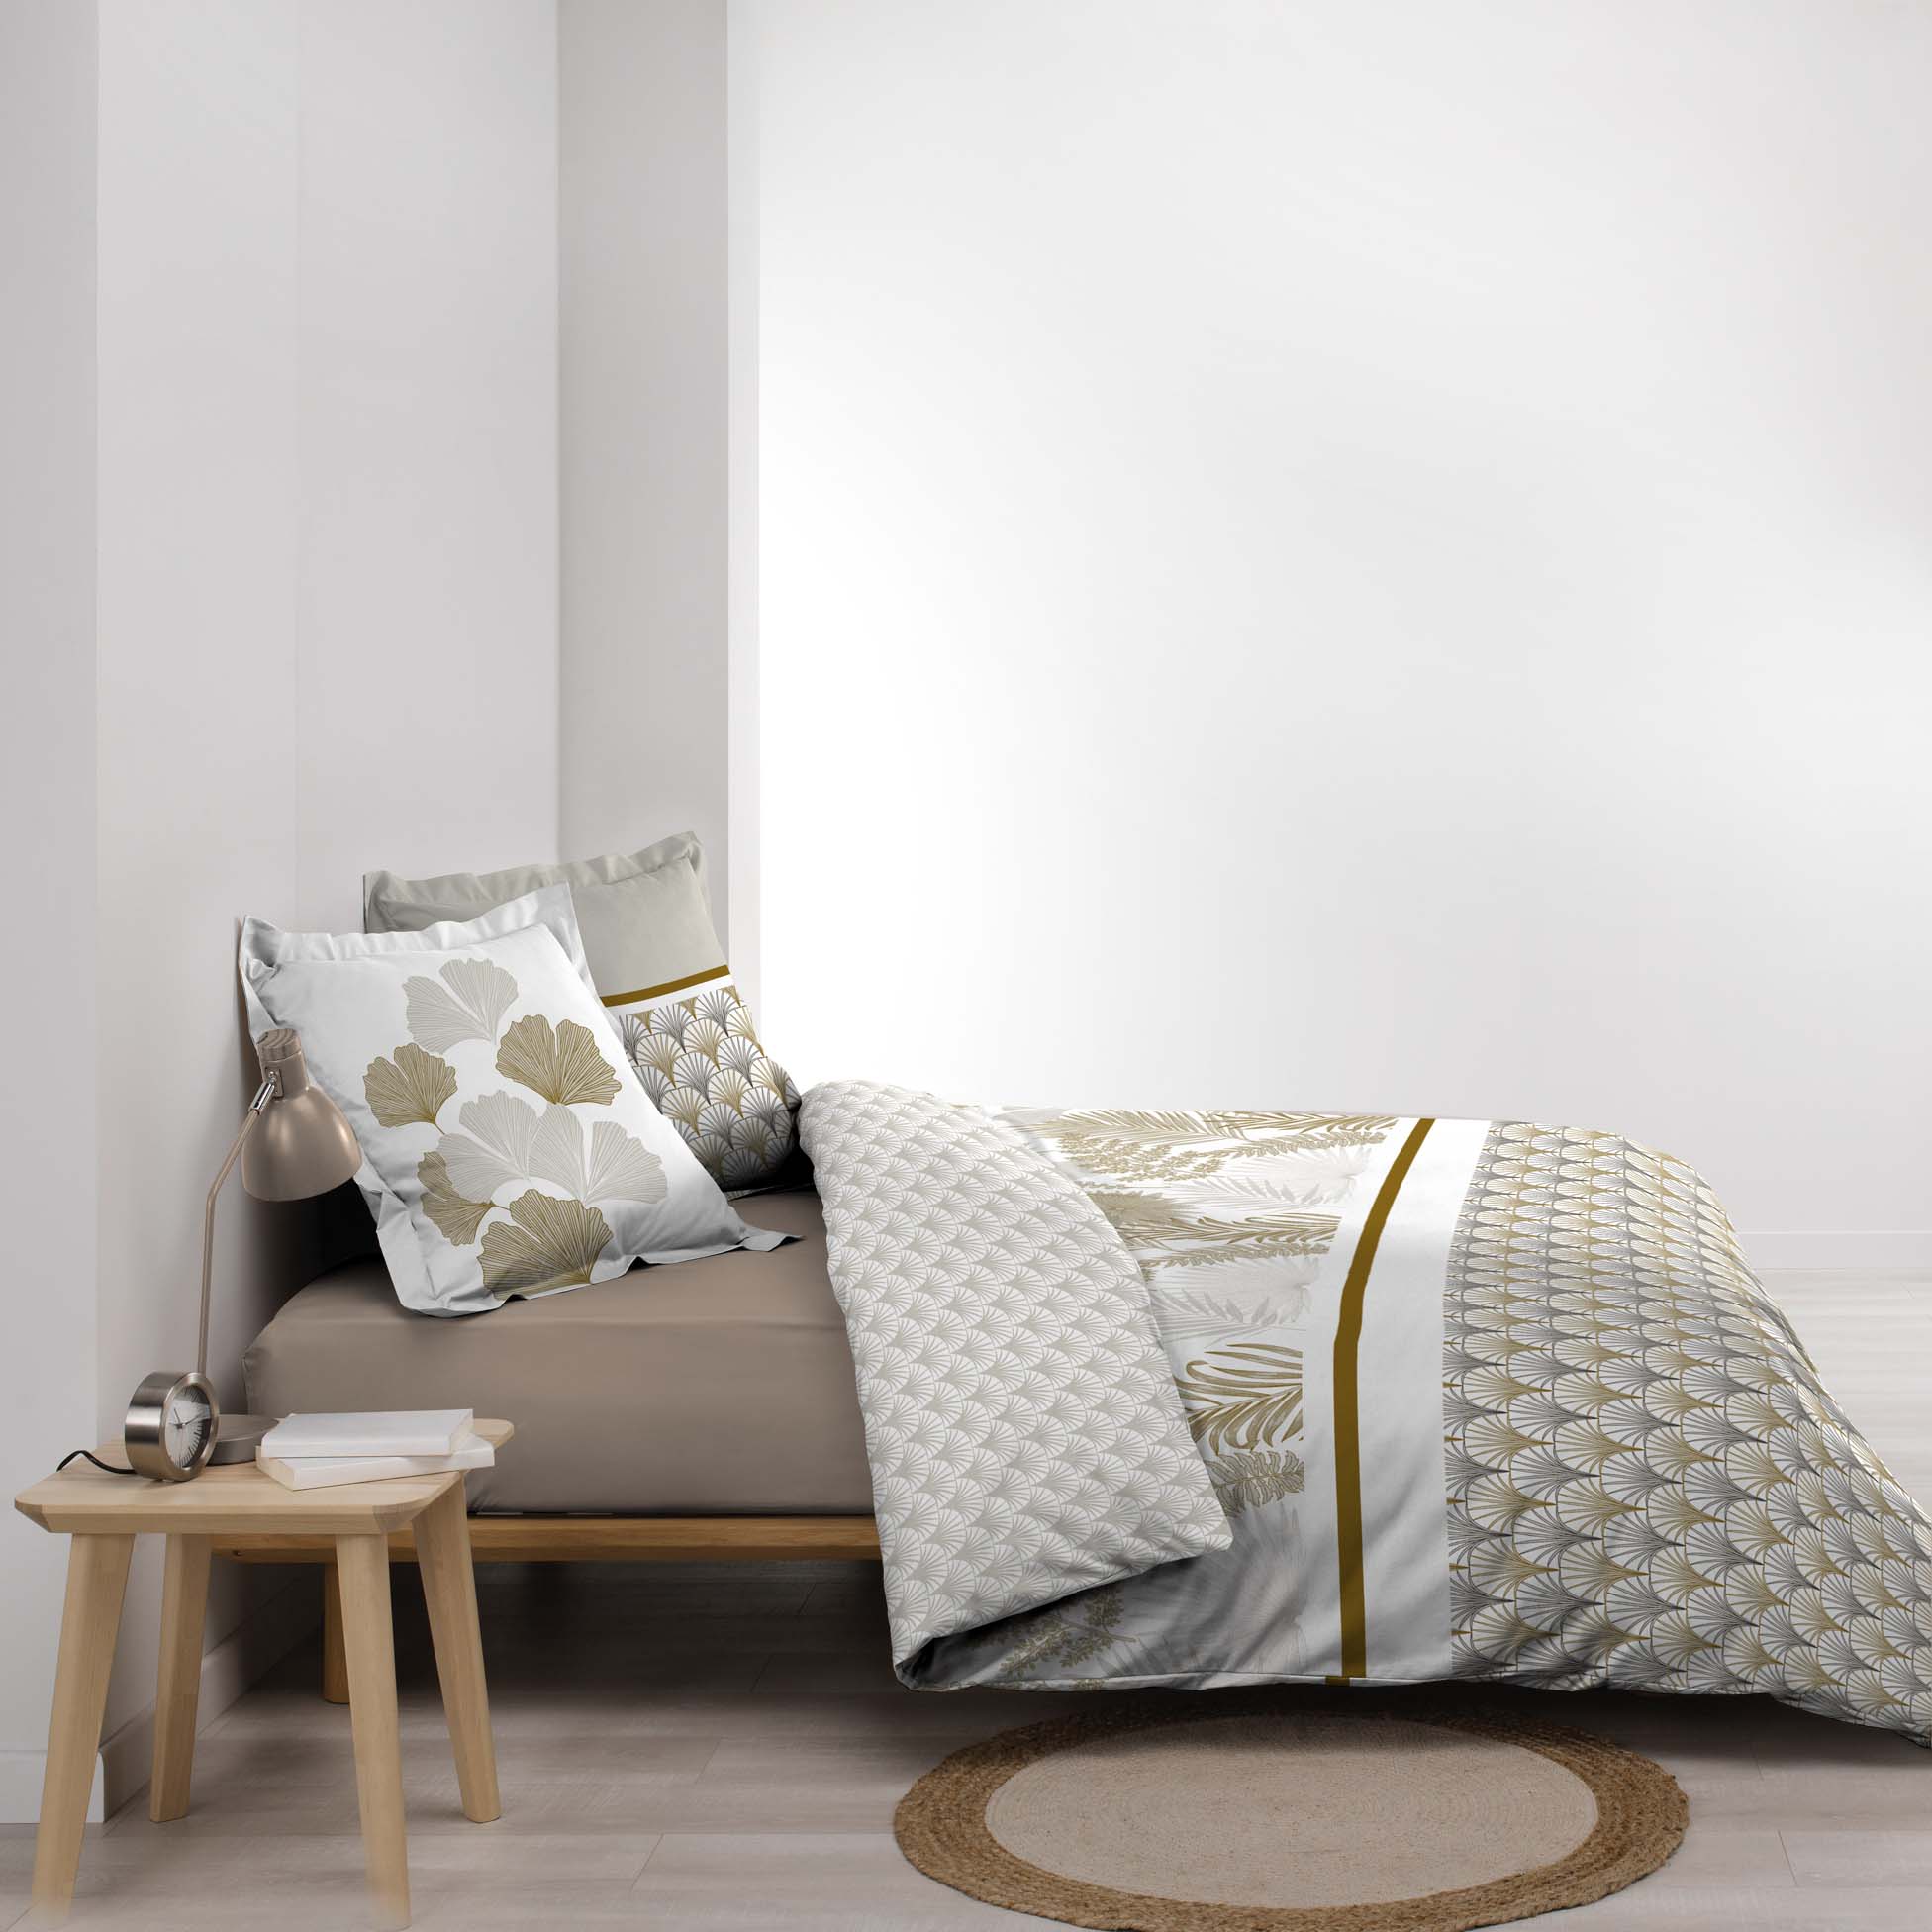 Housse couette + taies percale 220 x 240 cm Art deco